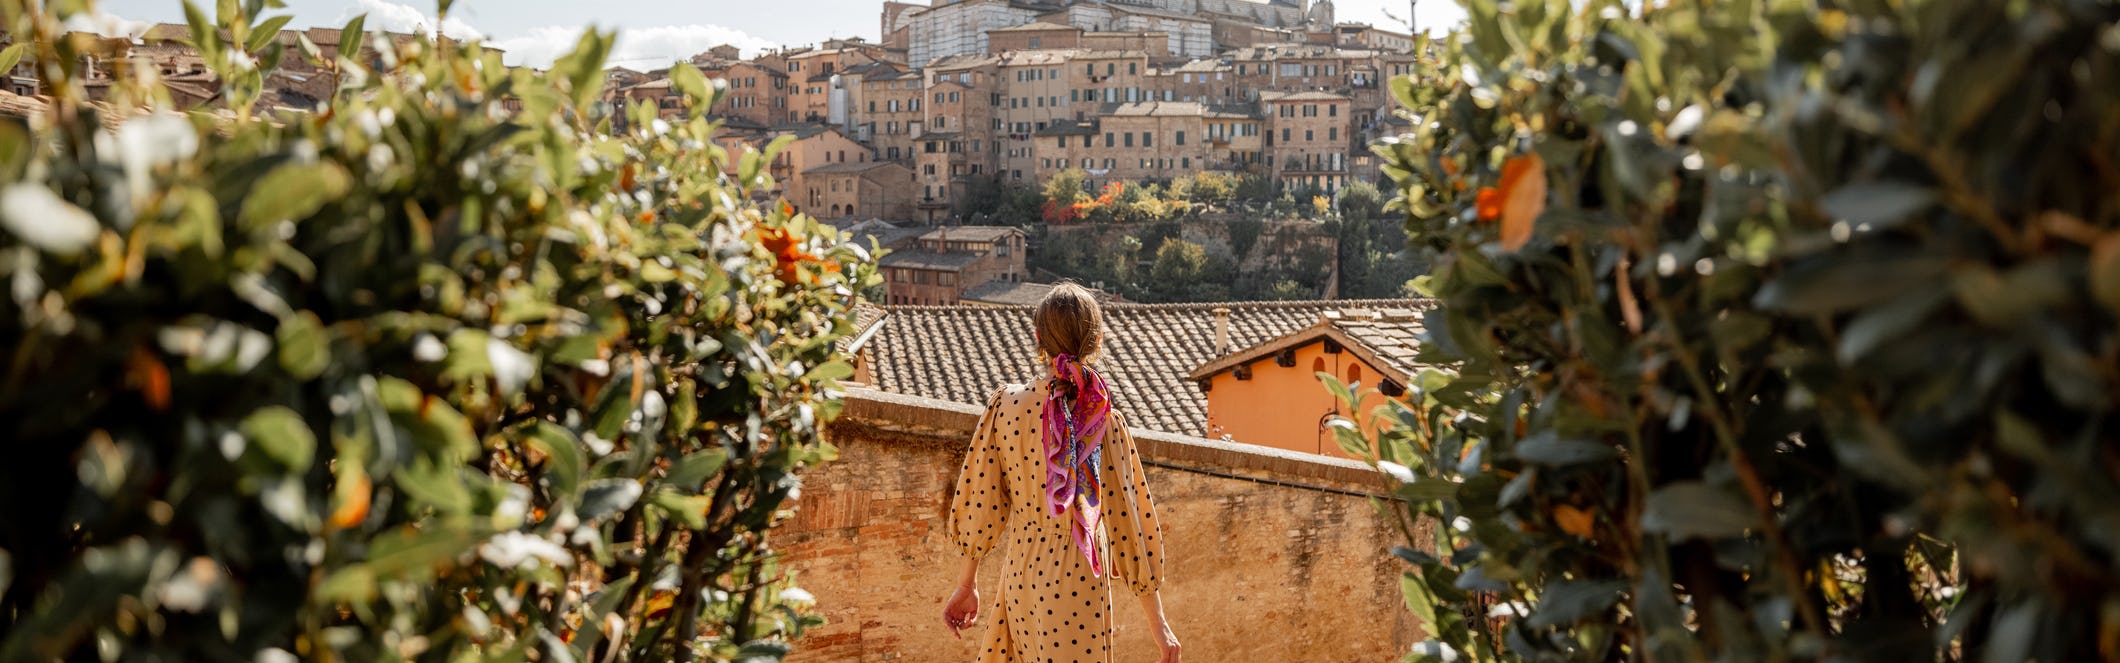 Woman in a yellow dress in Tuscany